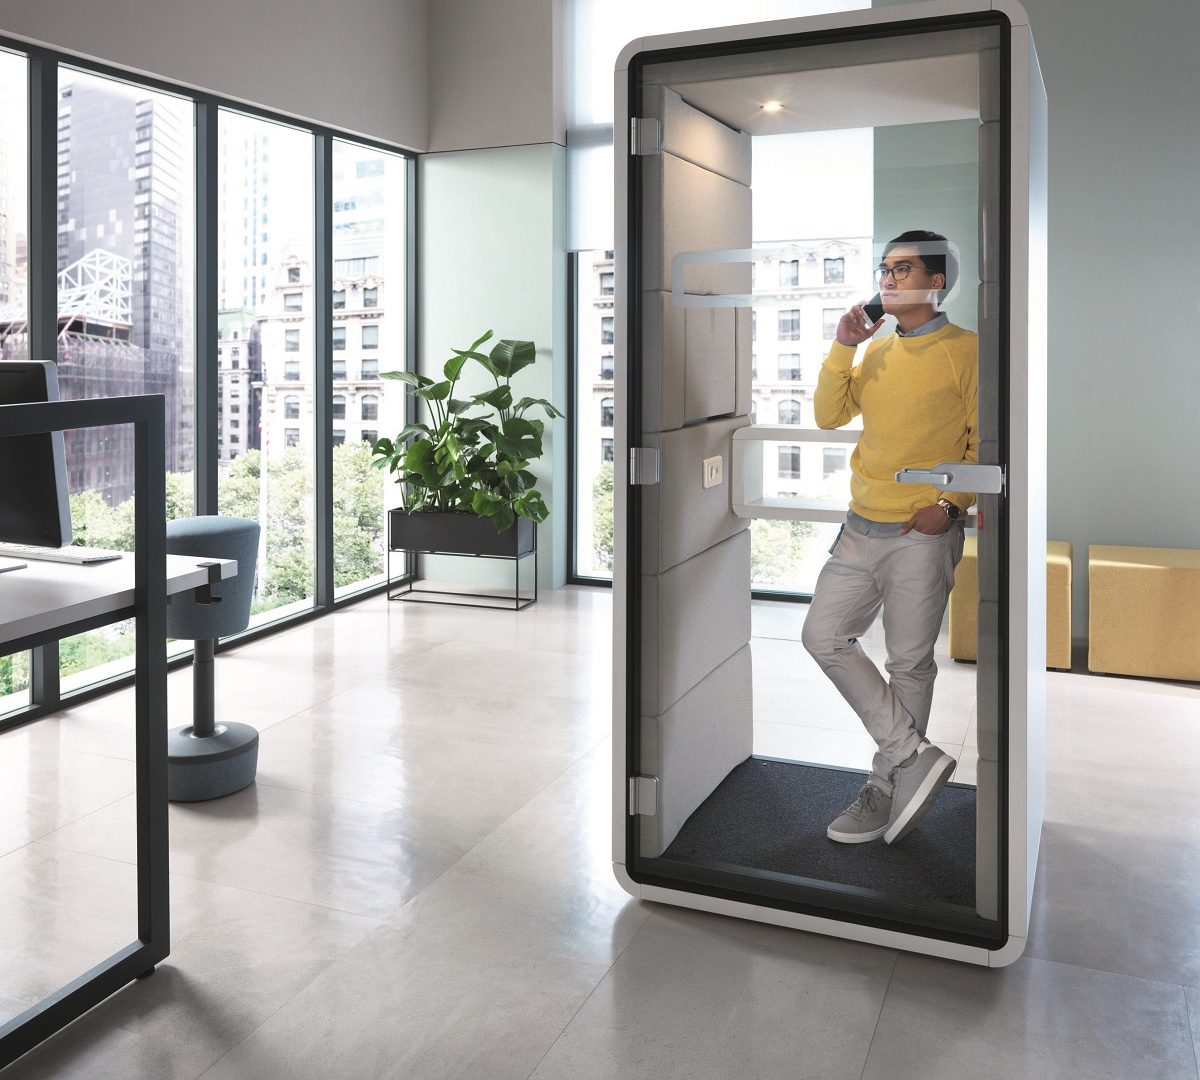 HushPhone office phone booth for private calls in open spaces